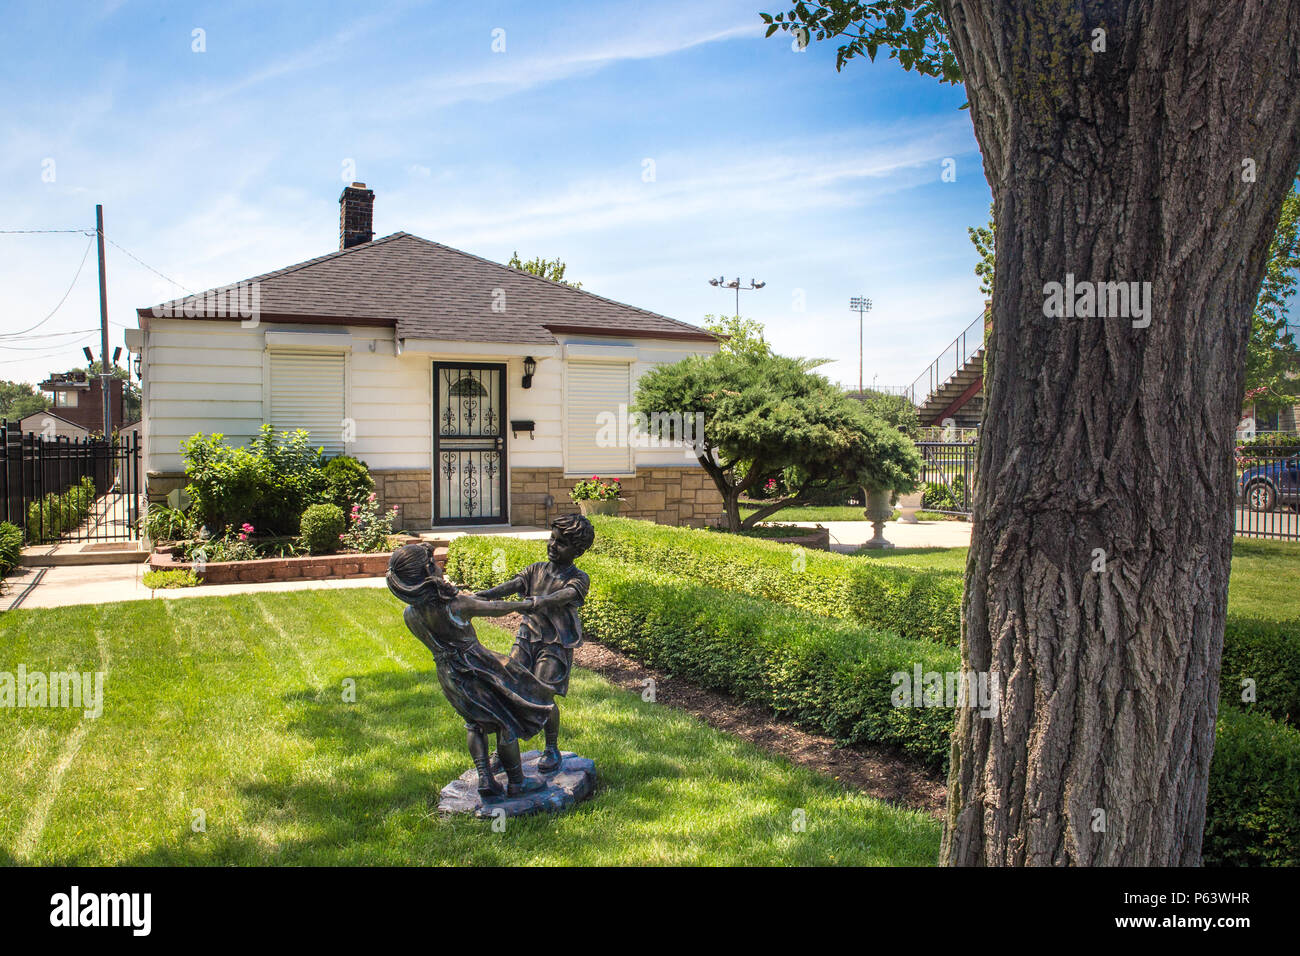 GARY, INDIANA - JUNE 24, 2018: Exterior view of childhood home of pop star Michael Jackson in his hometown of Gary Indiana Stock Photo